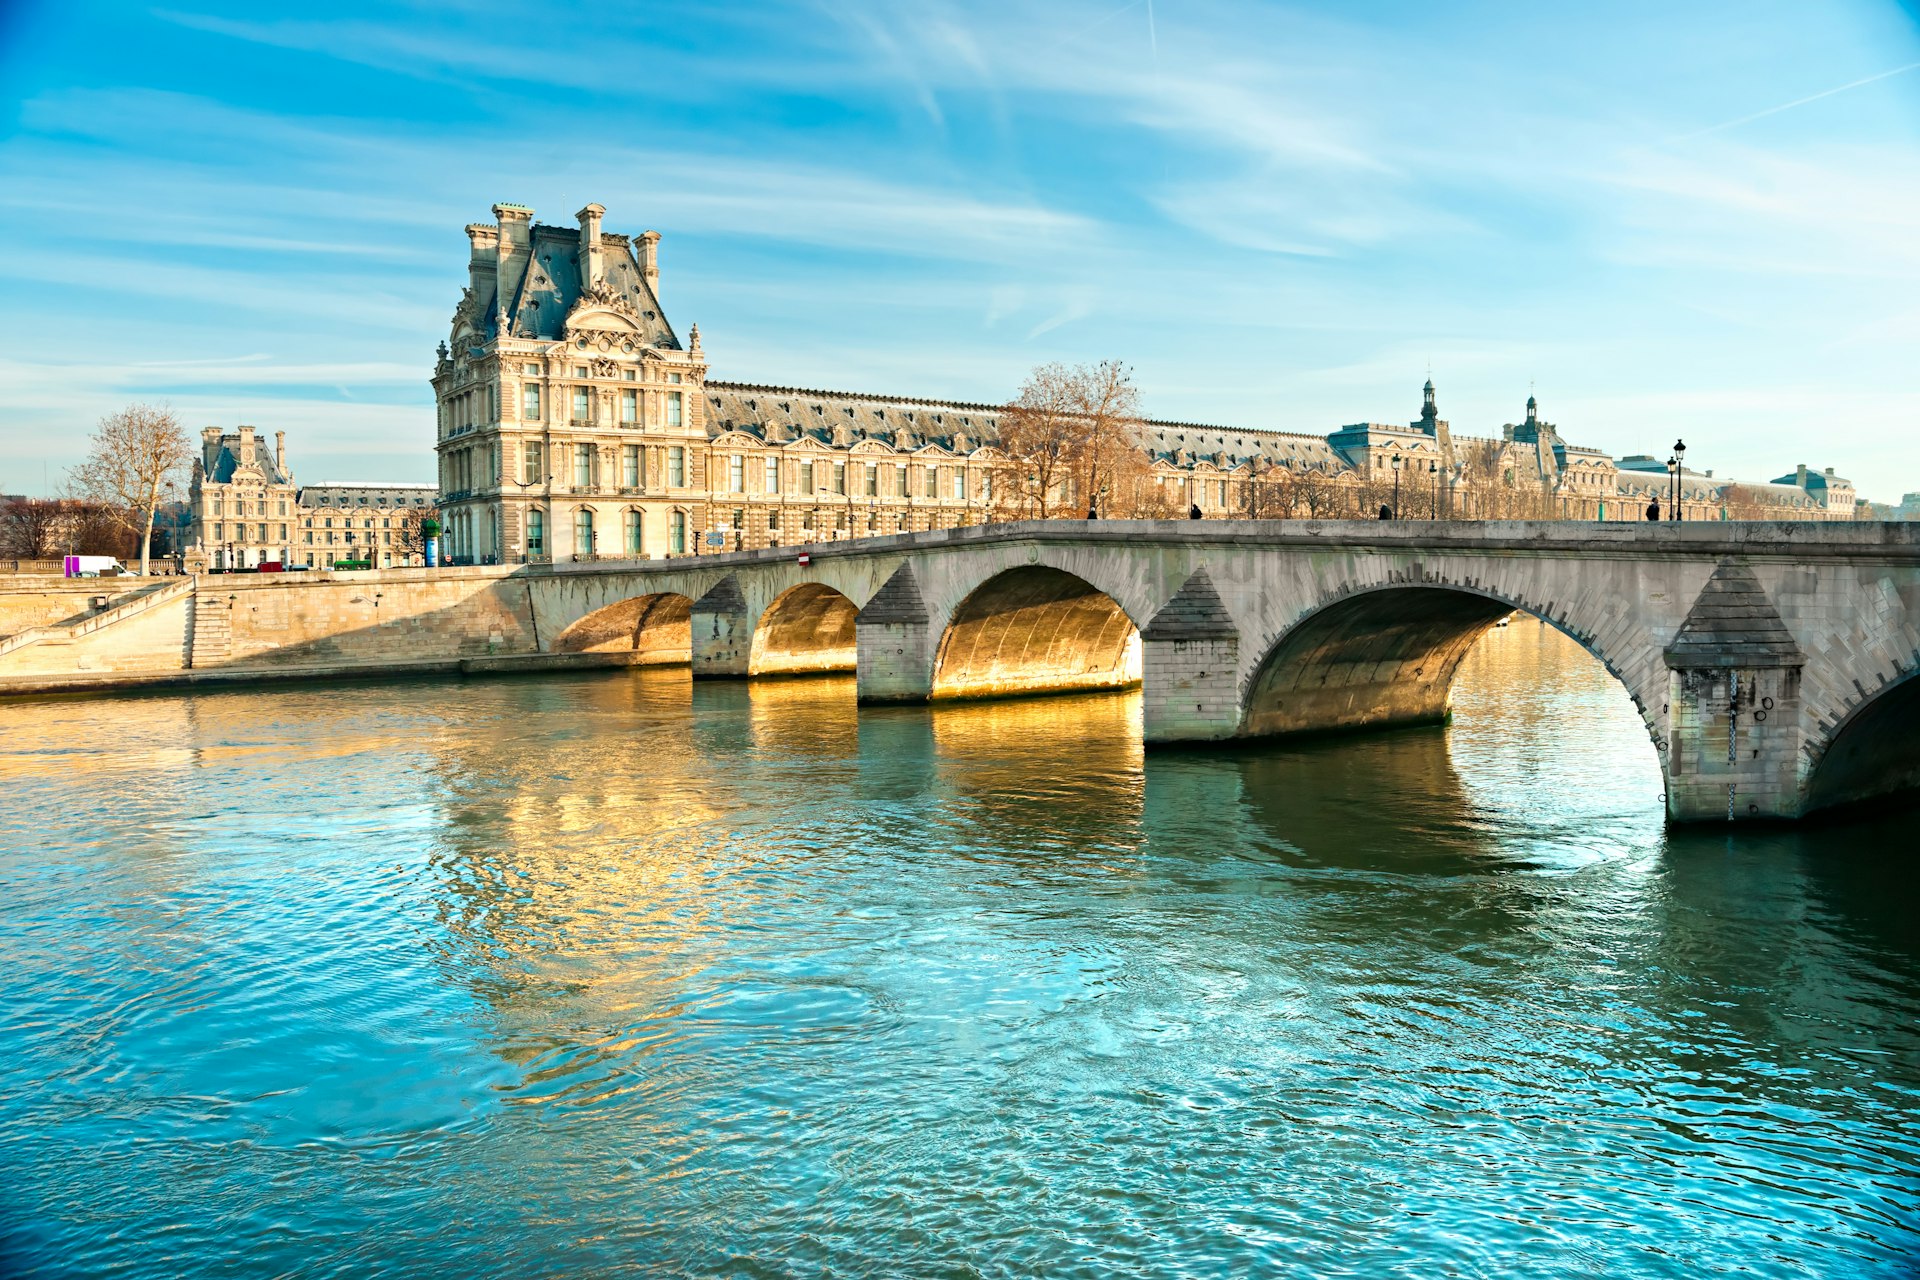 A river with an arched bridge crossing it. A classic-style large building in the background is the Louvre museum